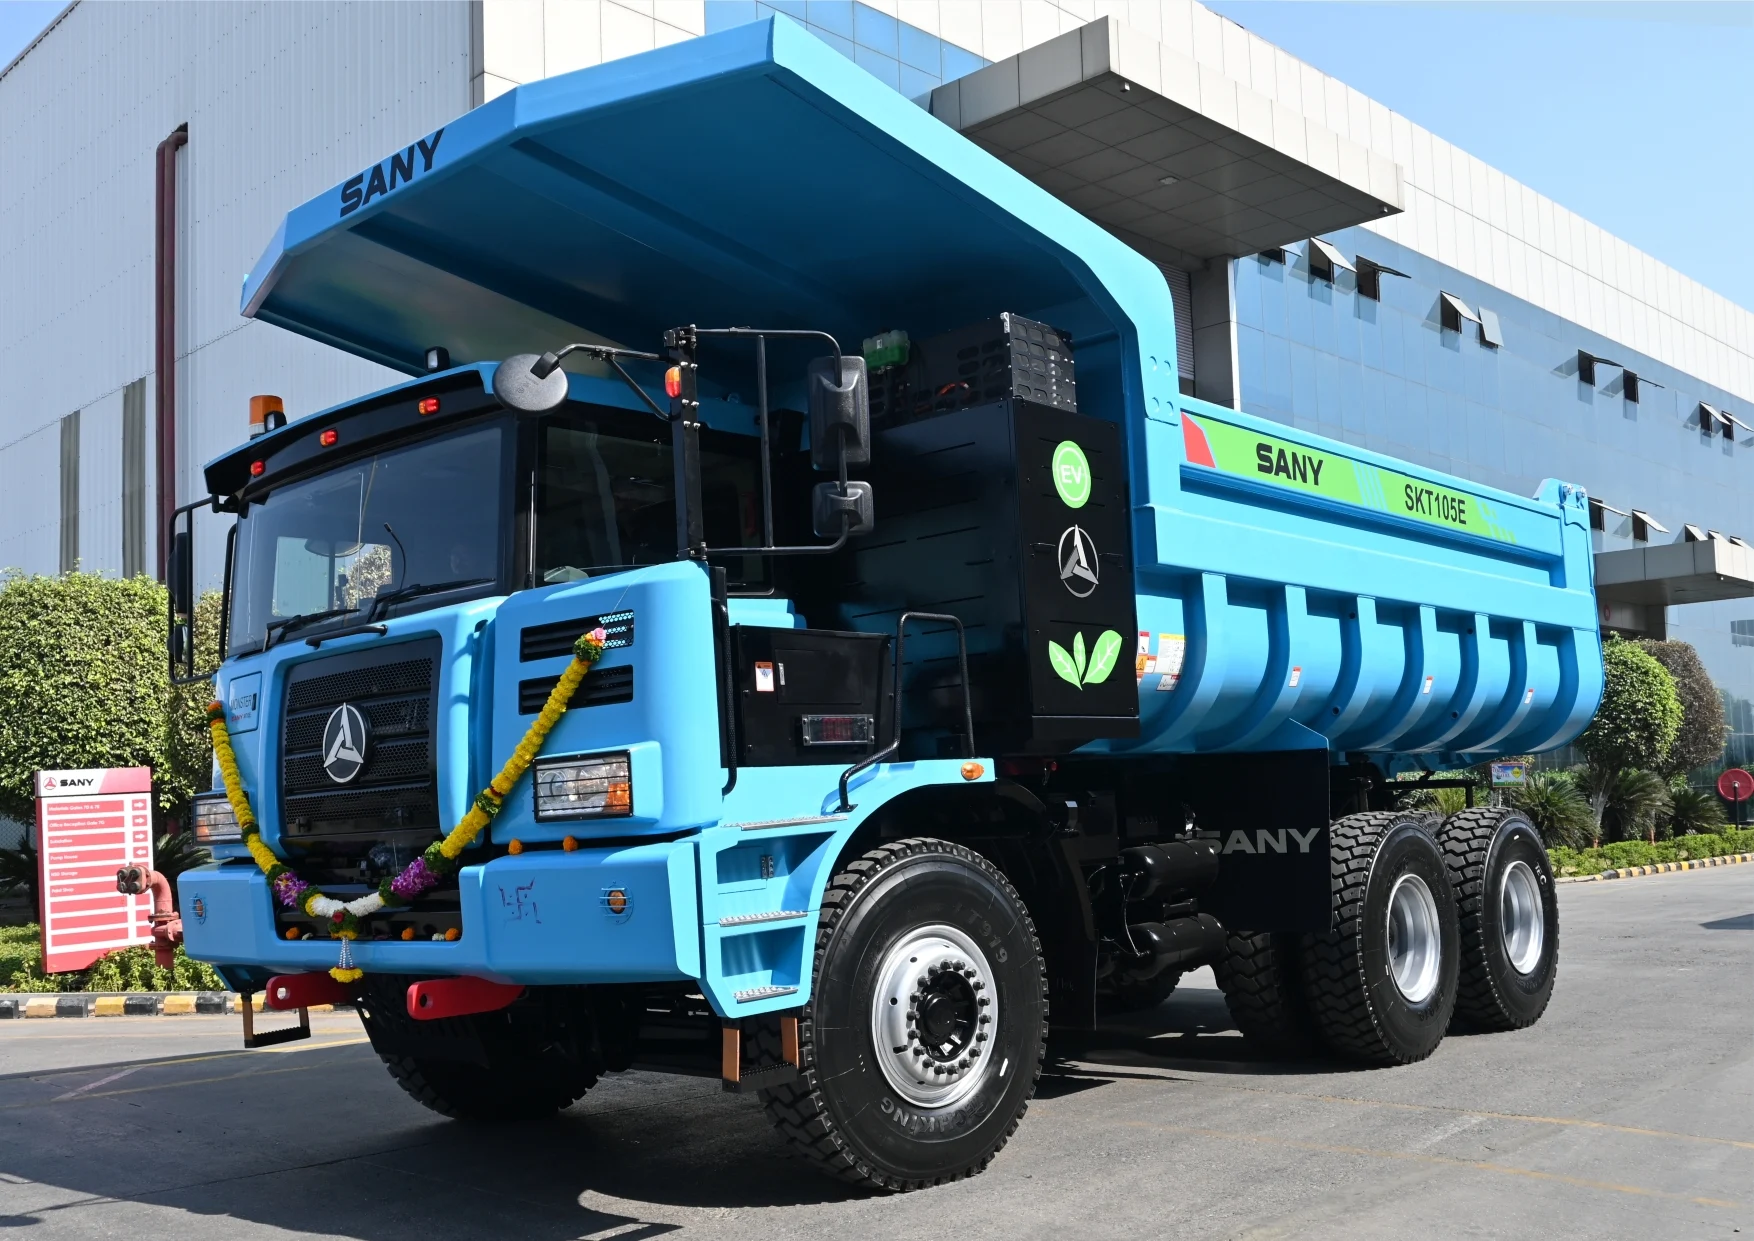 Sany India Introduces SKT105E, India’s First Locally Manufactured, Fully Electric Open Cast Mining Truck